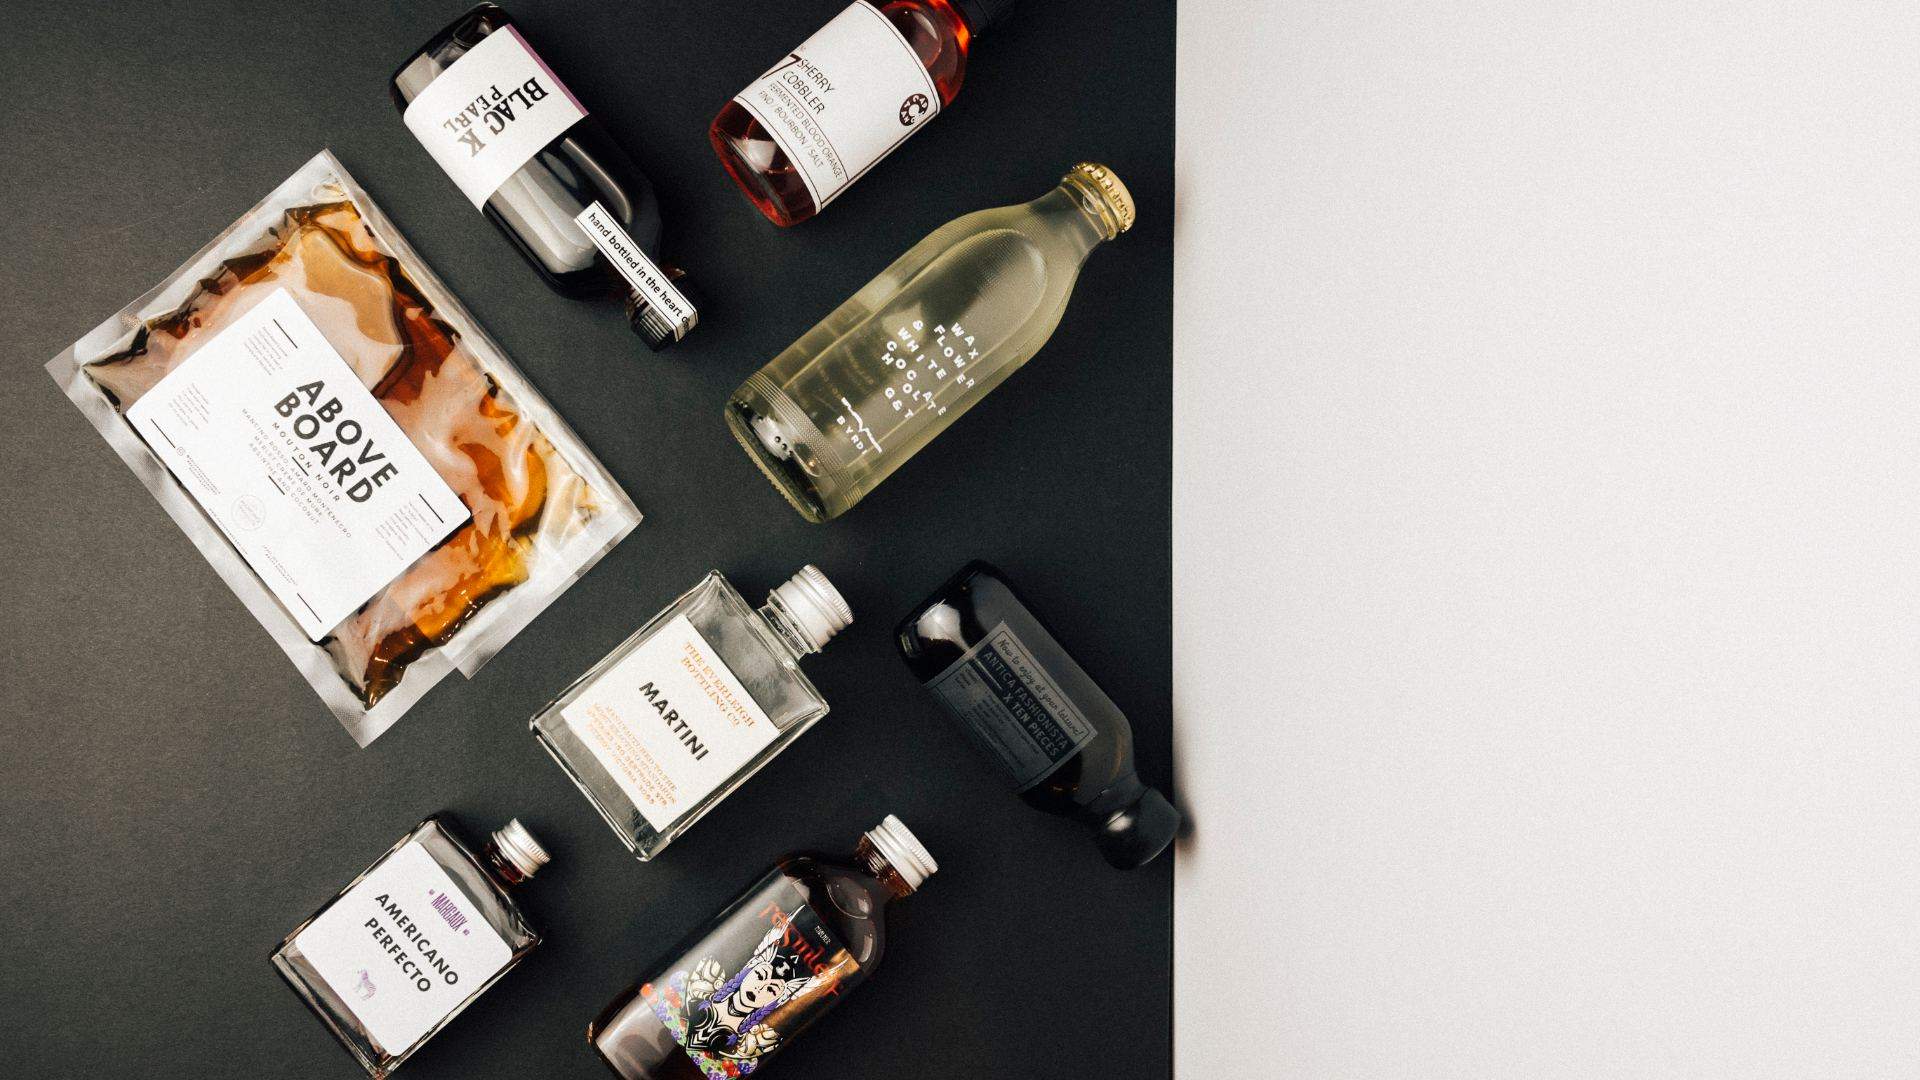 The Melbourne Mixtape Vol. 2 Is the New Cocktail Box Showcasing Eight of the City's Best Bars